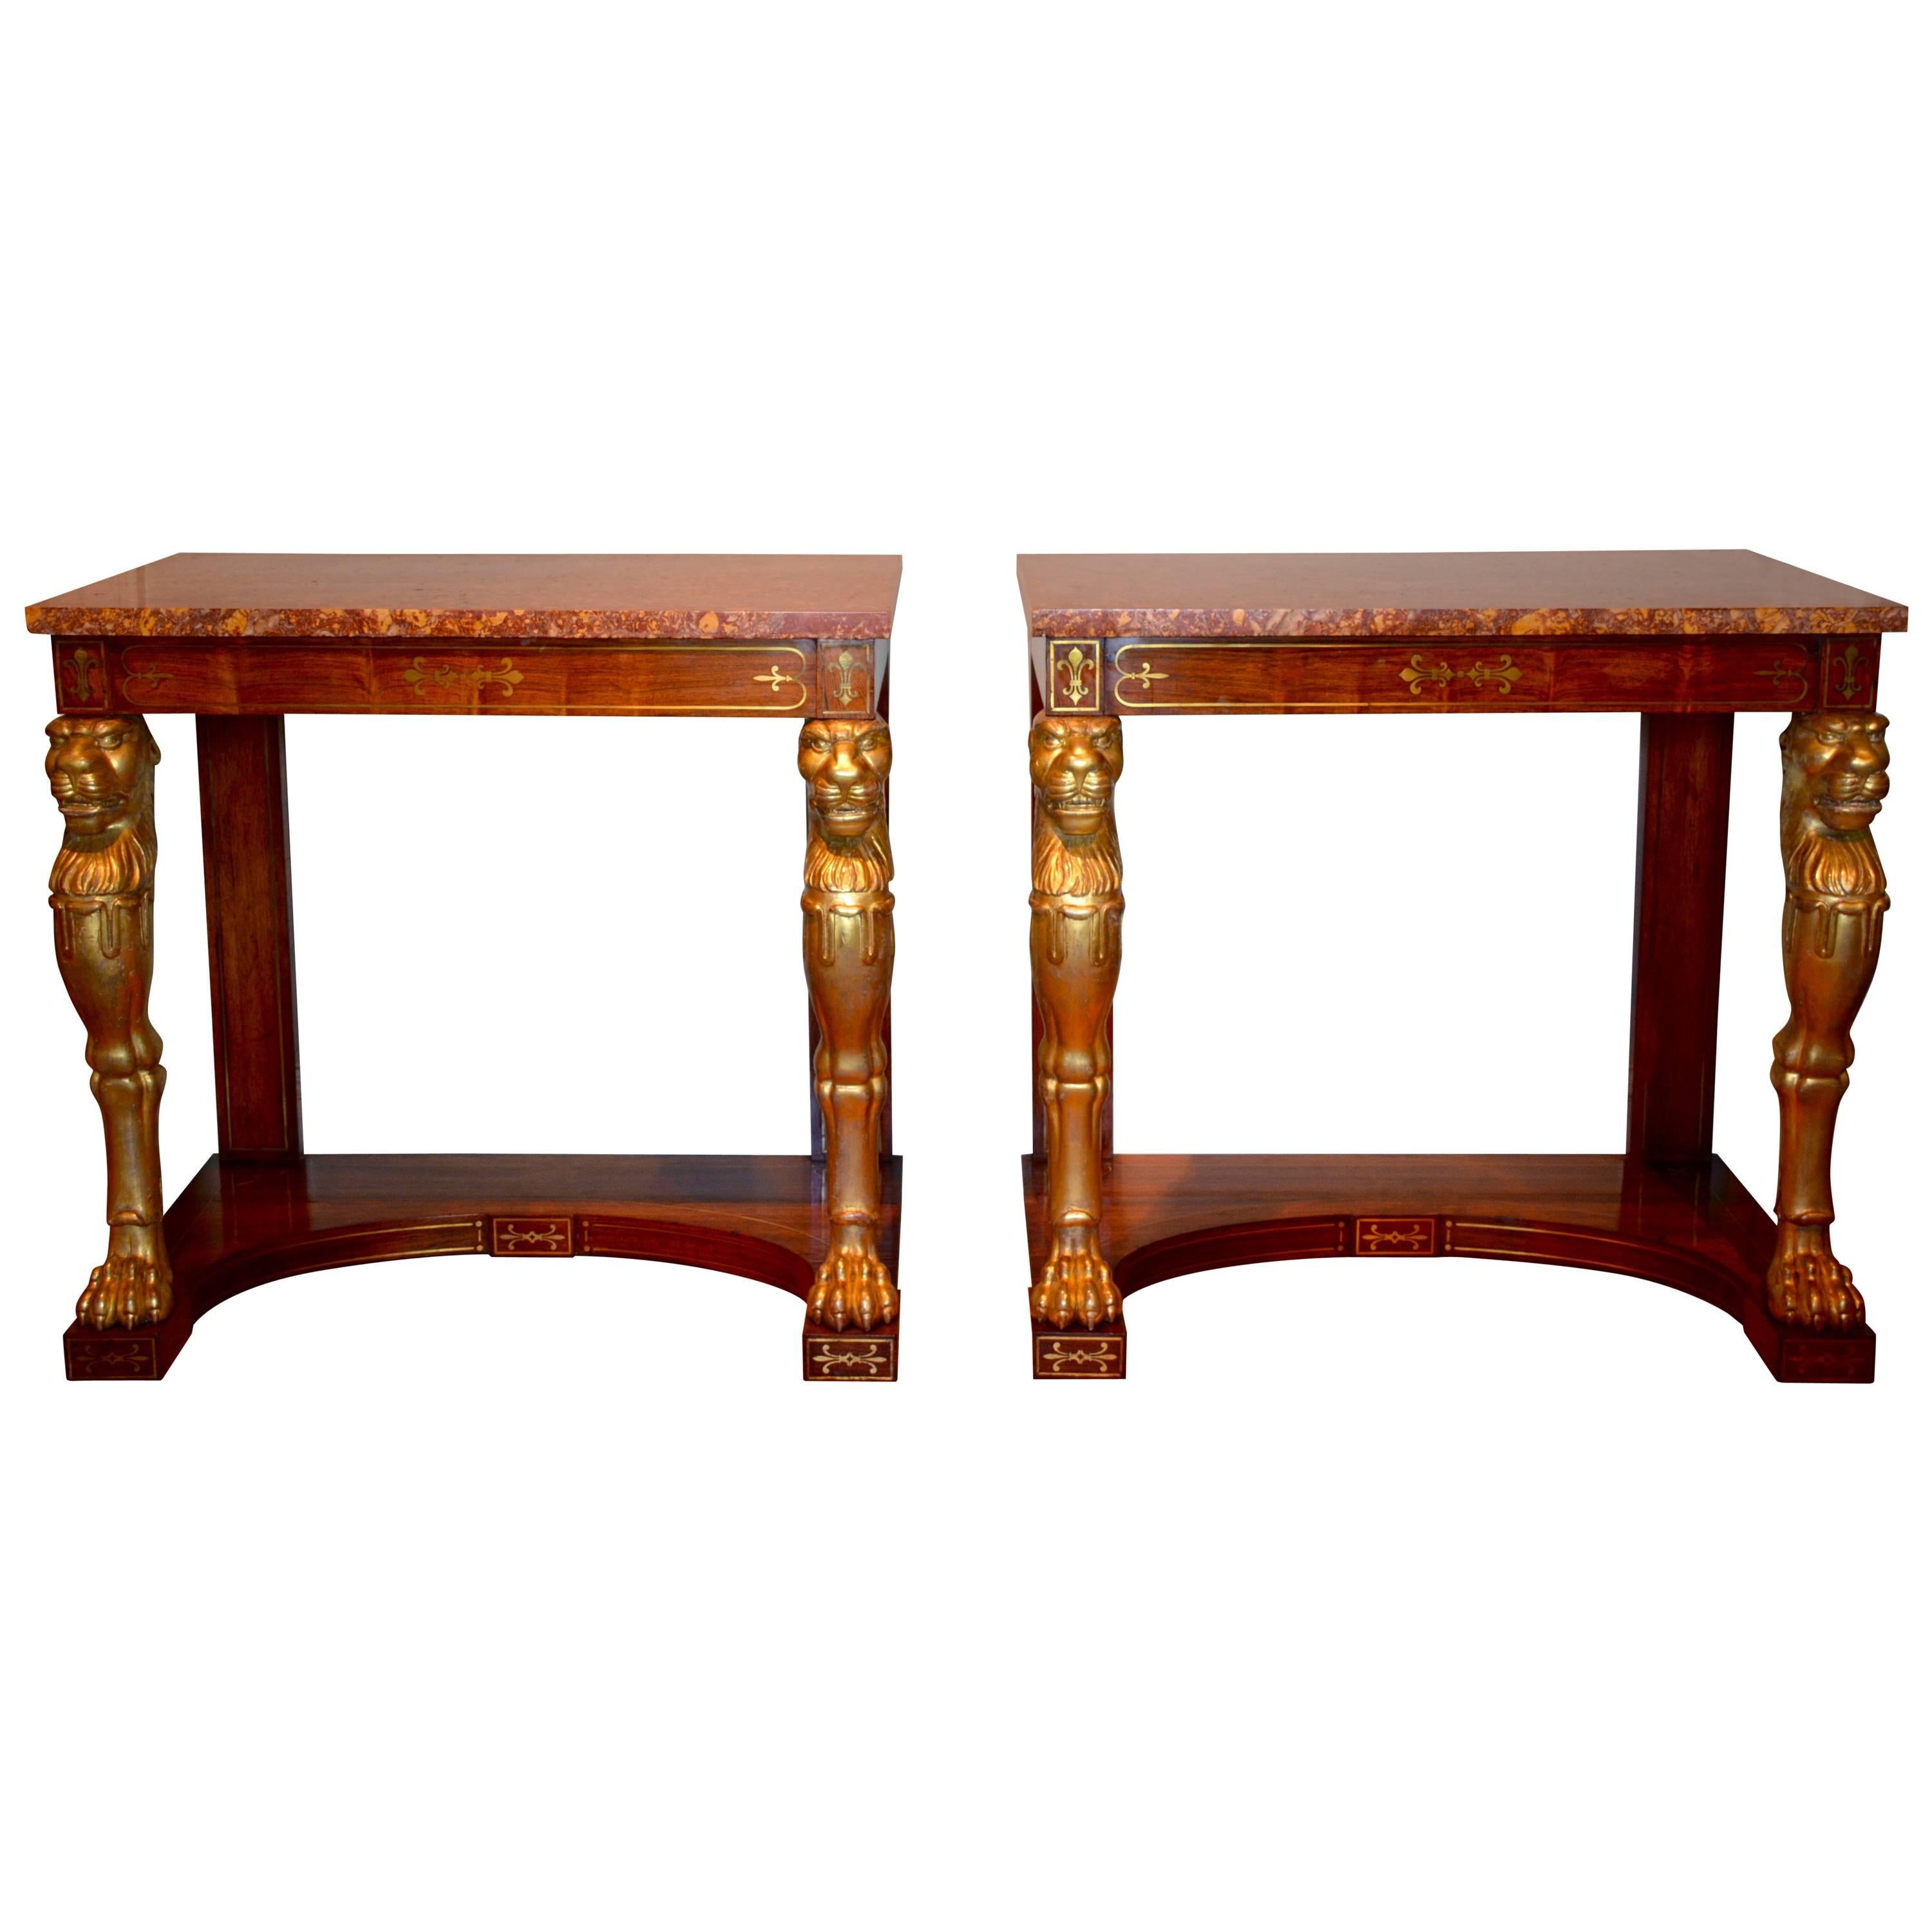 Fine Pair of Early 19th Century Marble-Top Side Tables